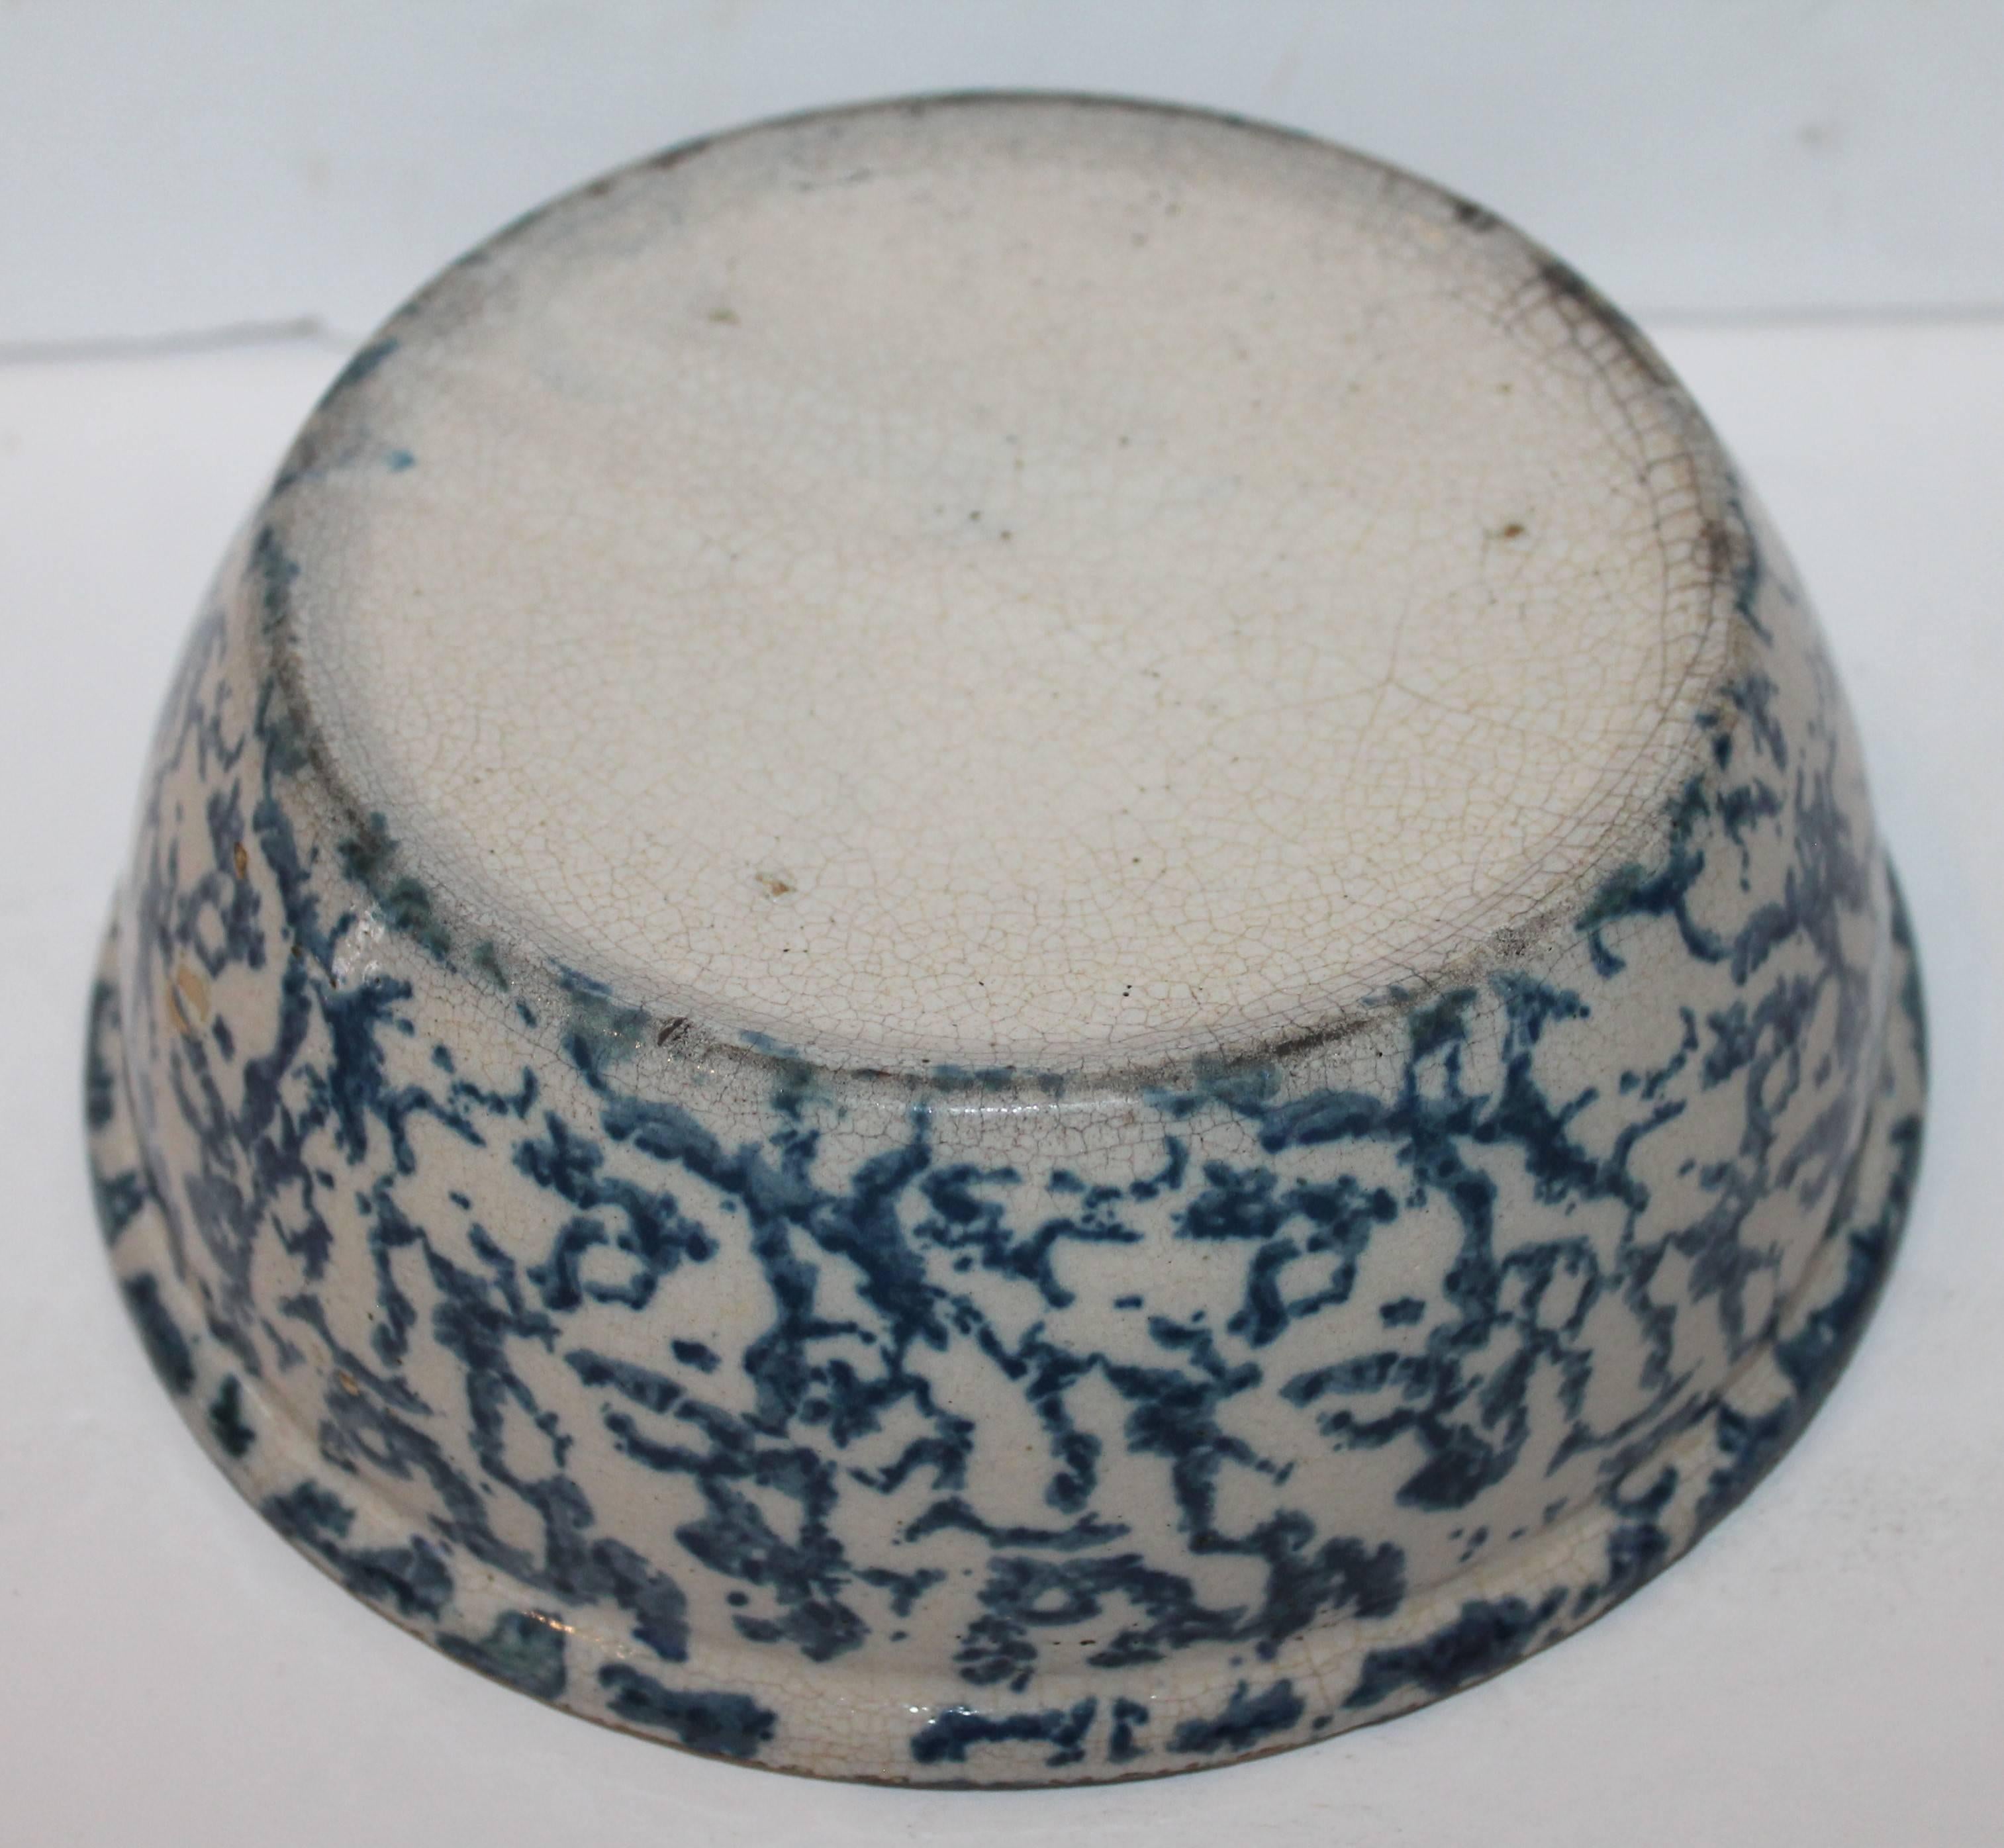 19th Century Sponge Ware Pottery Serving Bowl In Excellent Condition For Sale In Los Angeles, CA